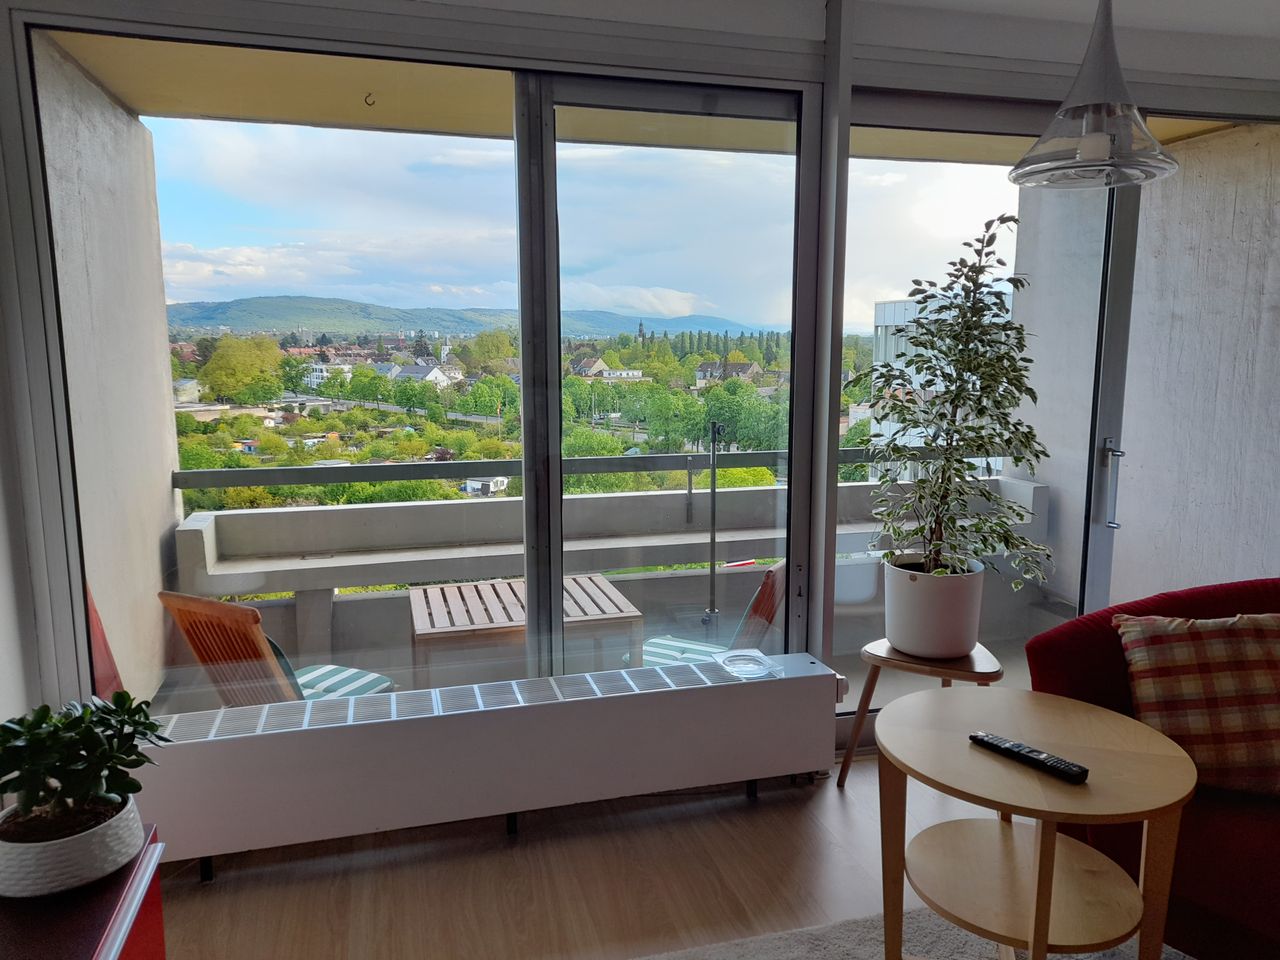 Beautiful 3-room flat with upscale interior with balcony and fitted kitchen in Karlsruhe